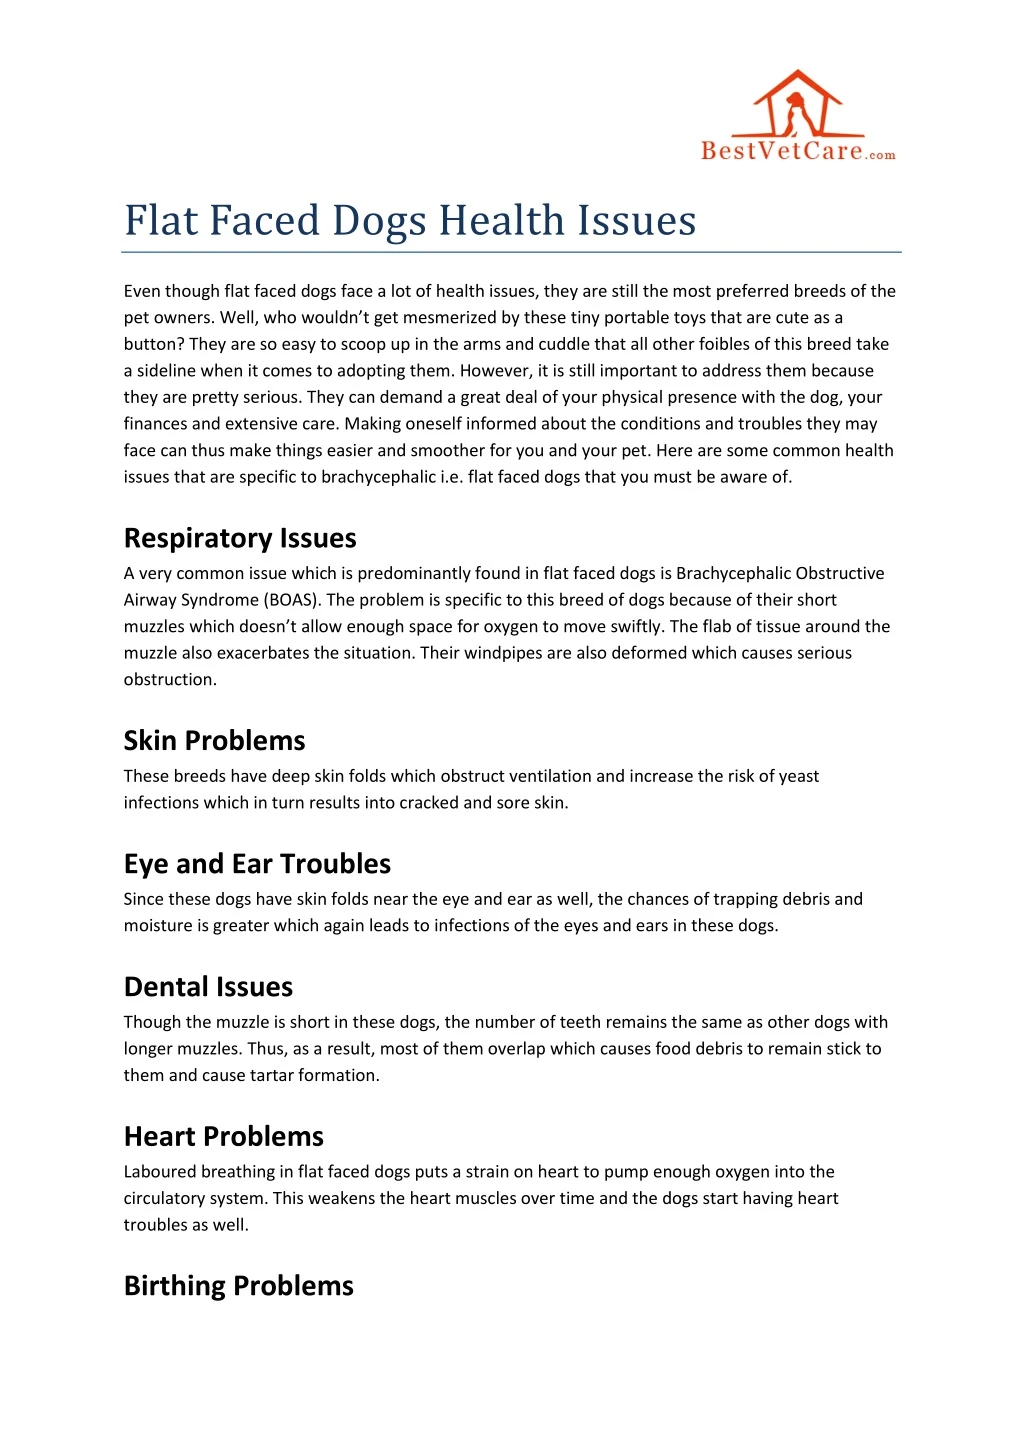 PPT - Flat Faced Dogs Health Issues PowerPoint Presentation, free ...